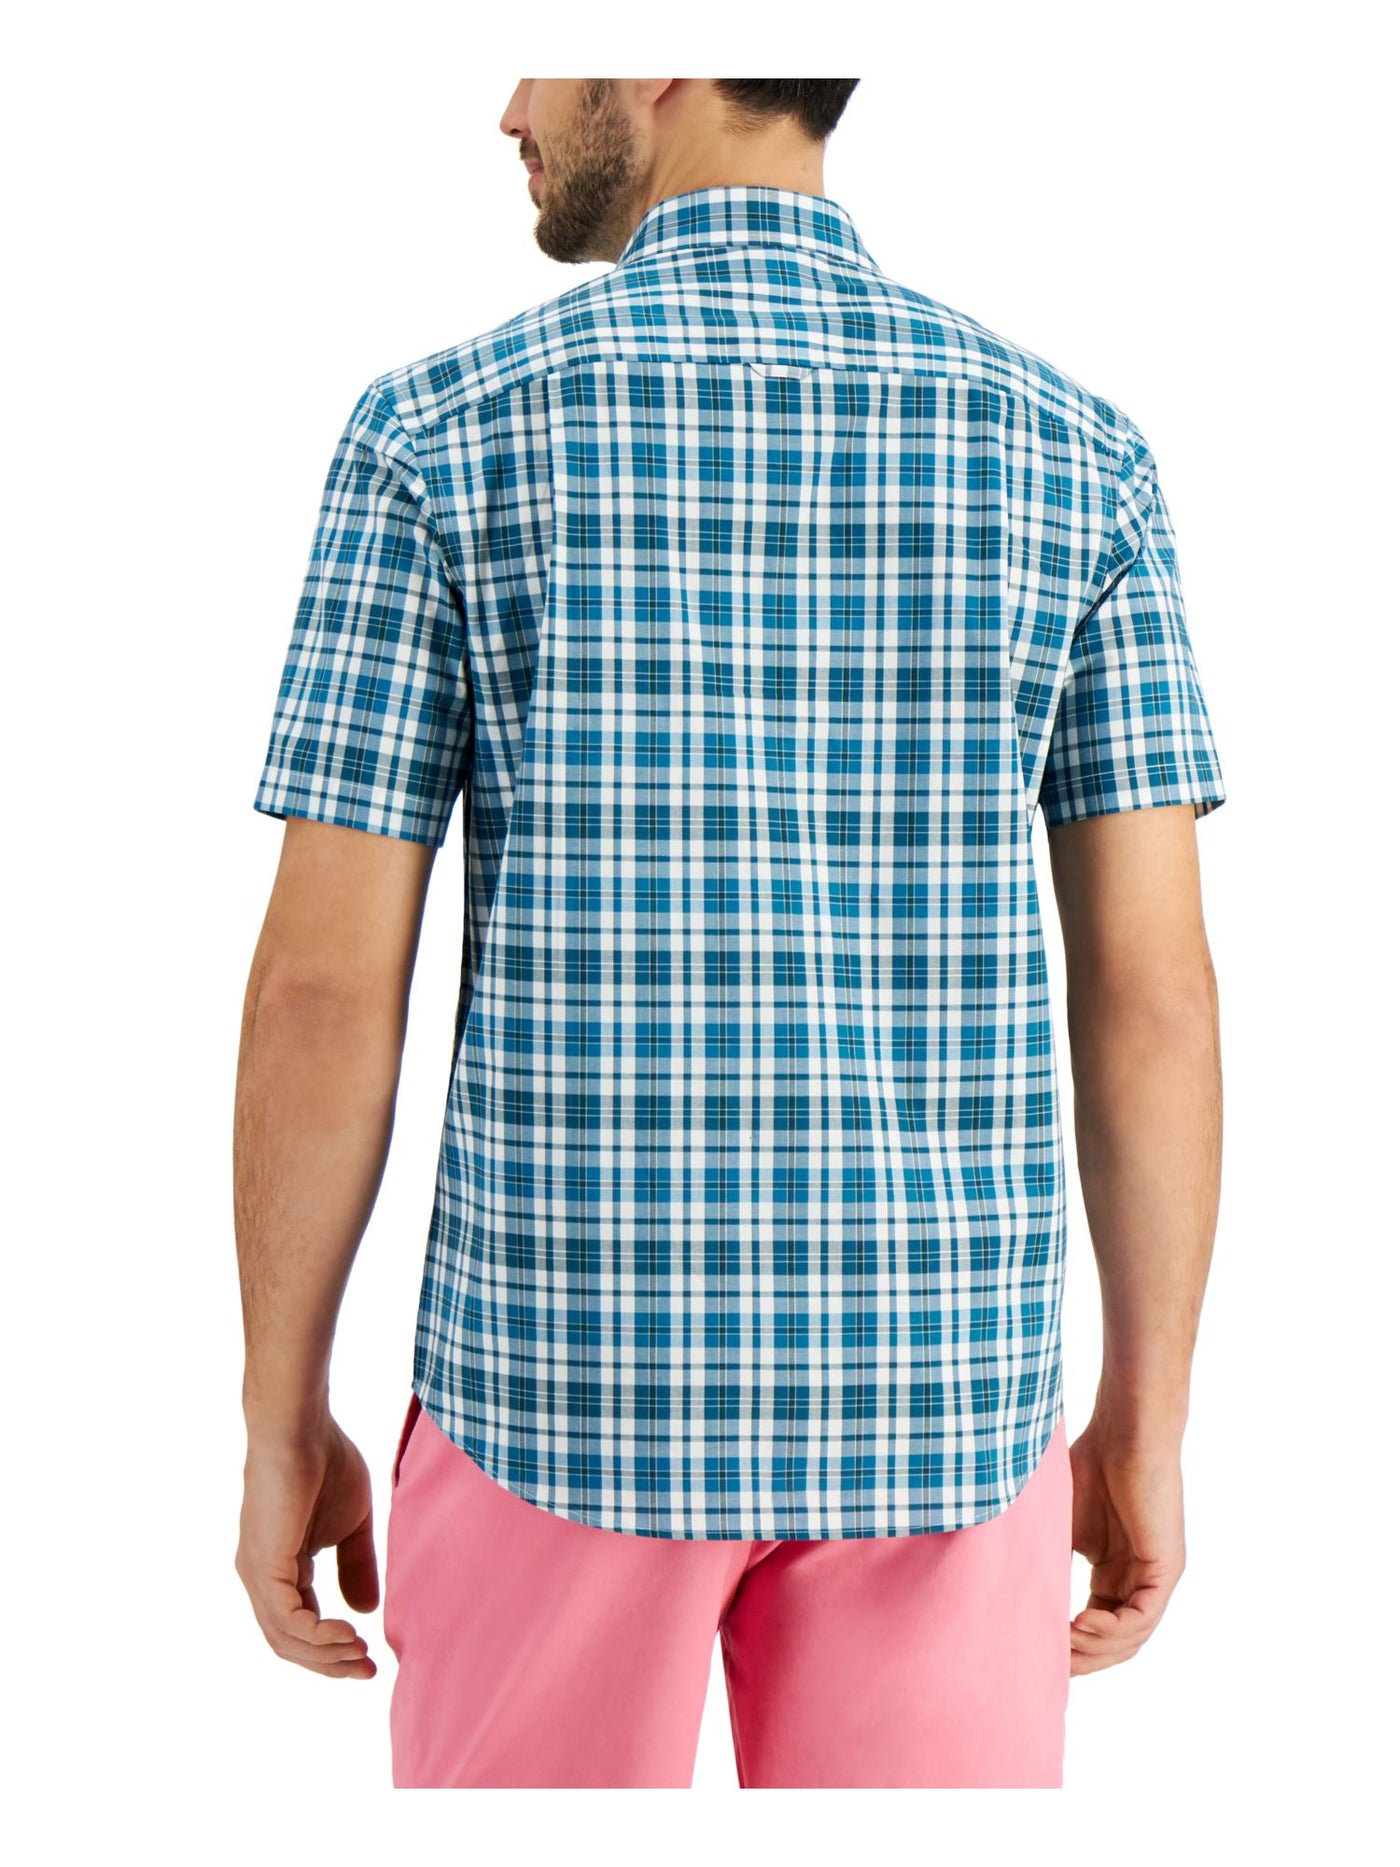 CLUBROOM Mens Teal Plaid Classic Fit Button Down Stretch Casual Shirt S